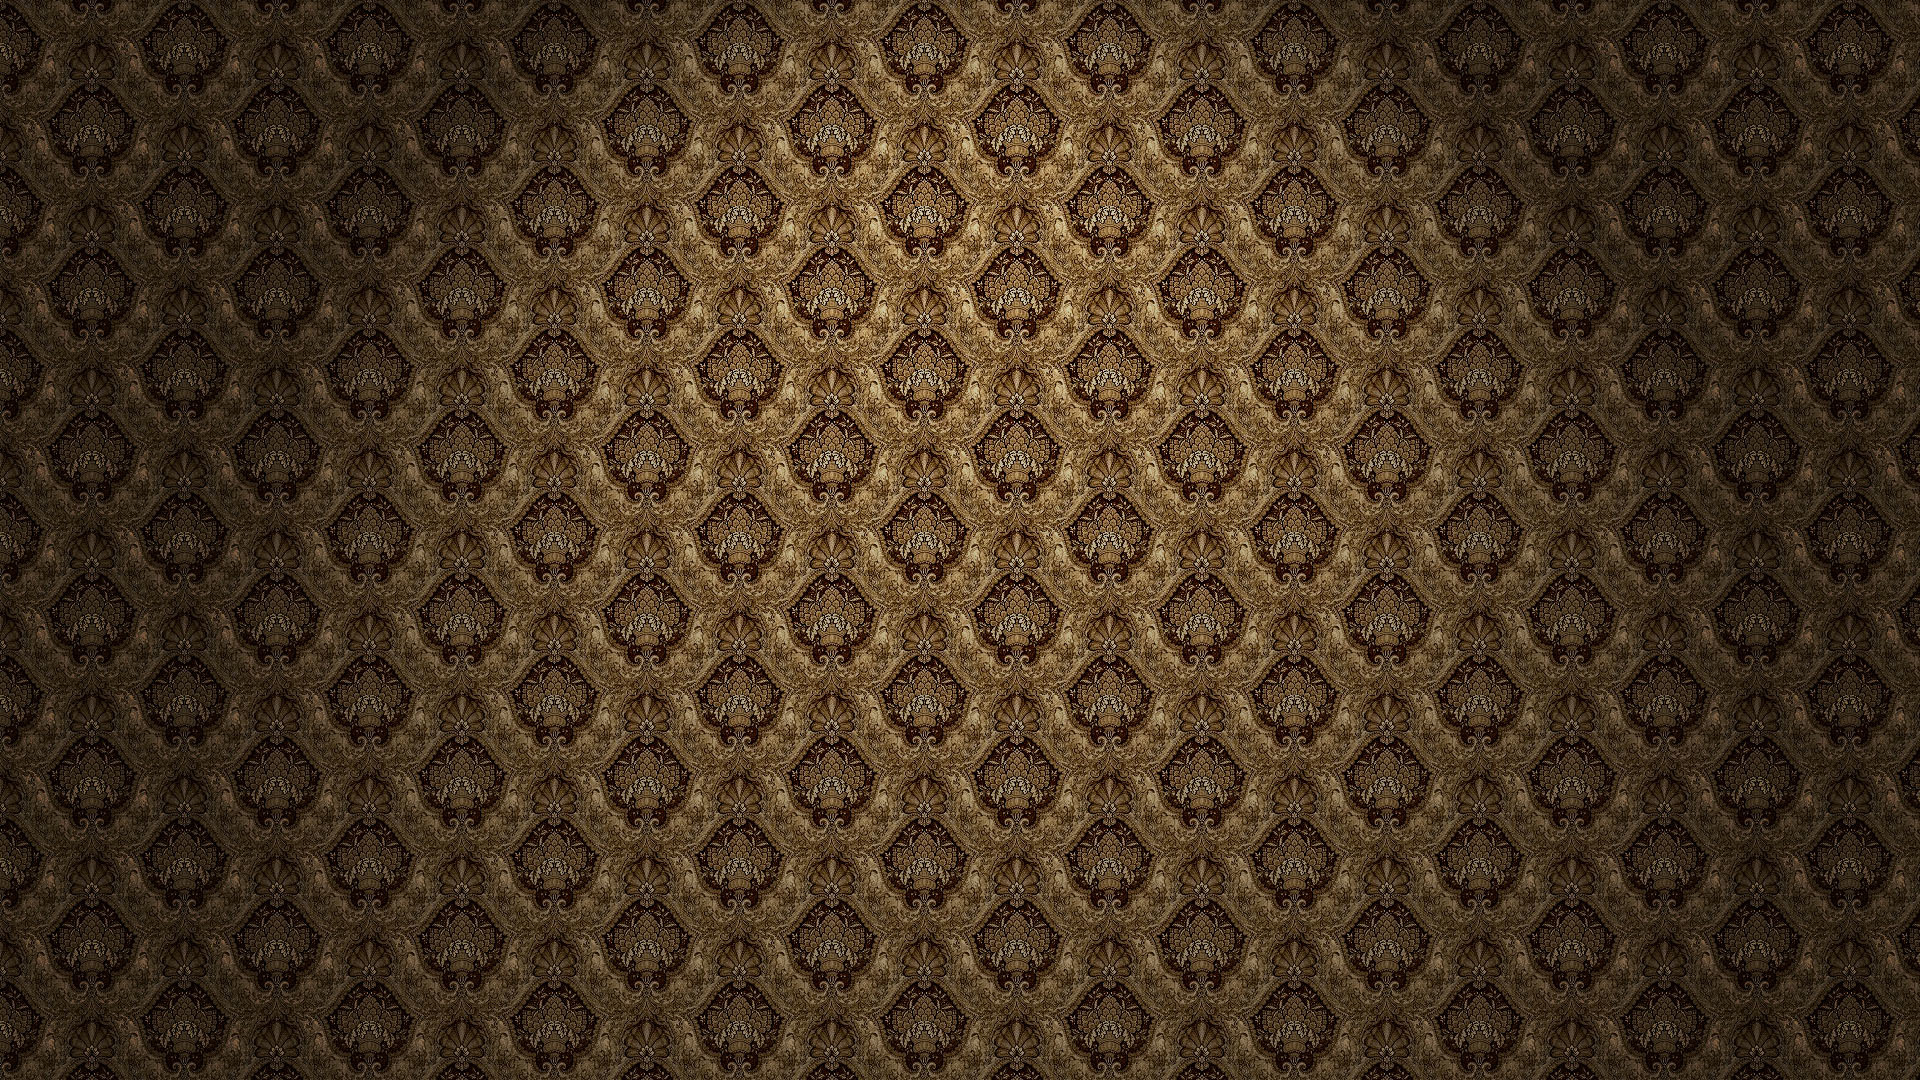  is a Gold and Black Pattern wallpaper This Gold and Black Pattern 1920x1080